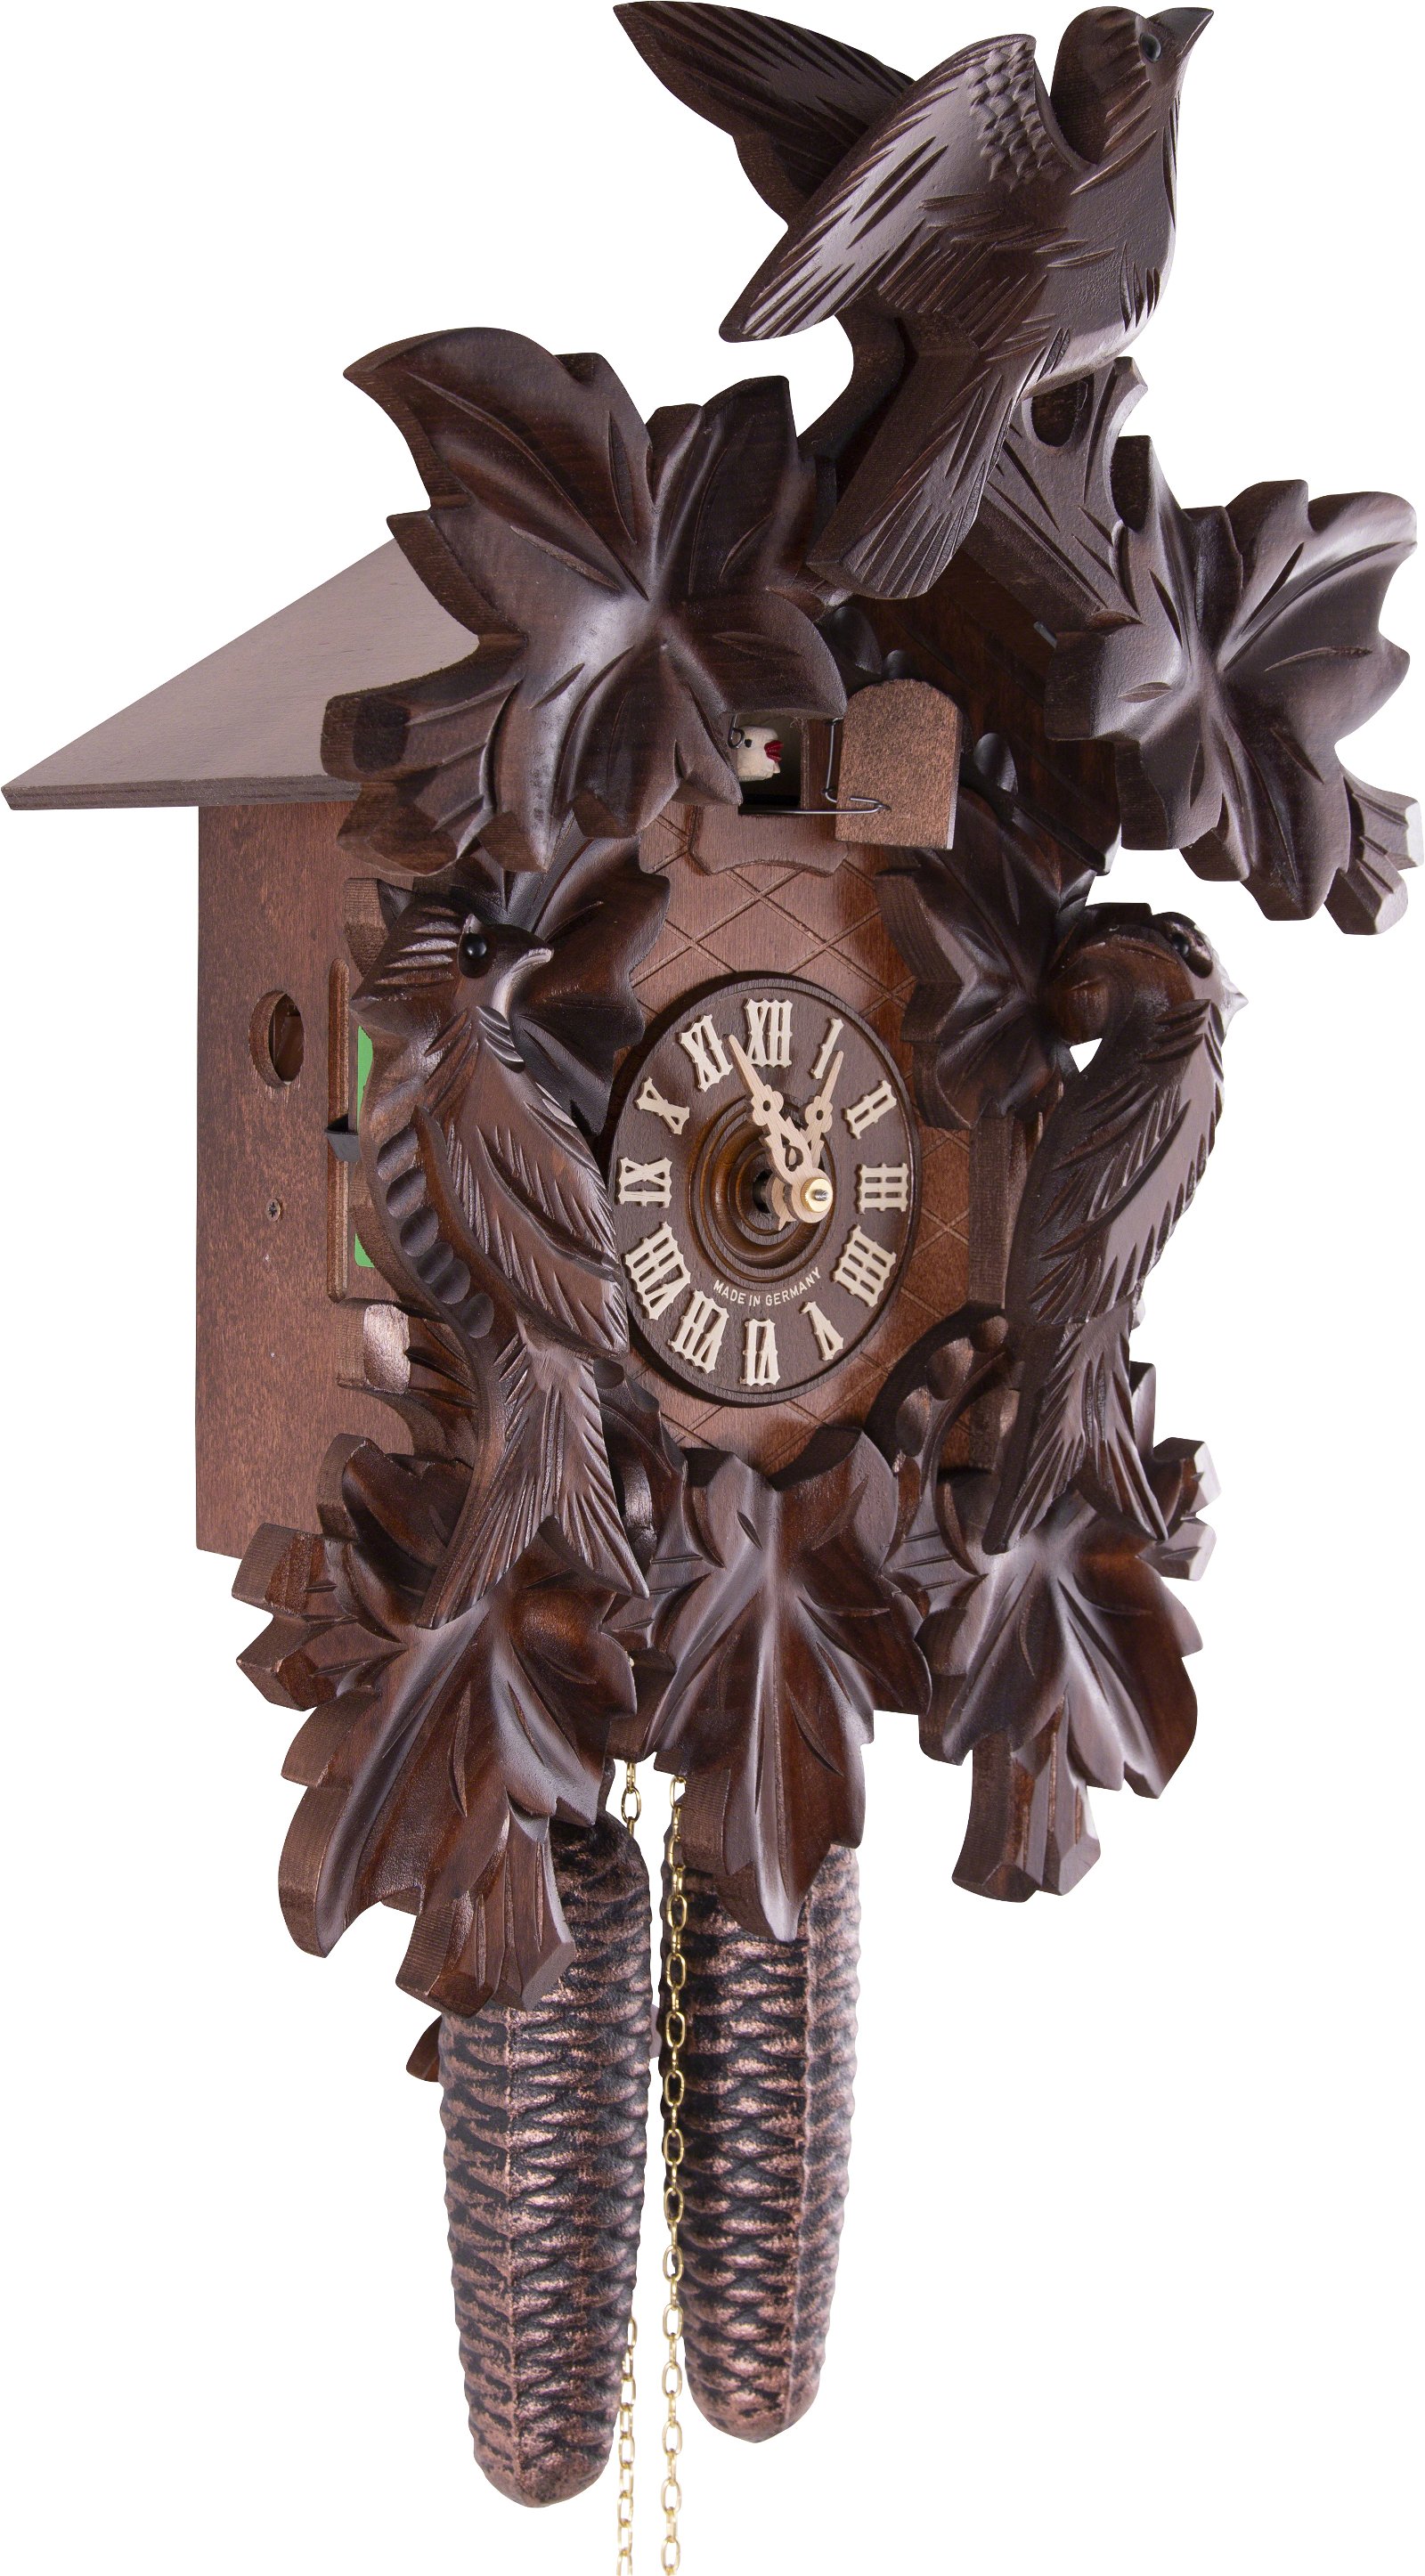 Cuckoo Clock 8-day-movement Carved-Style 40cm by Hekas